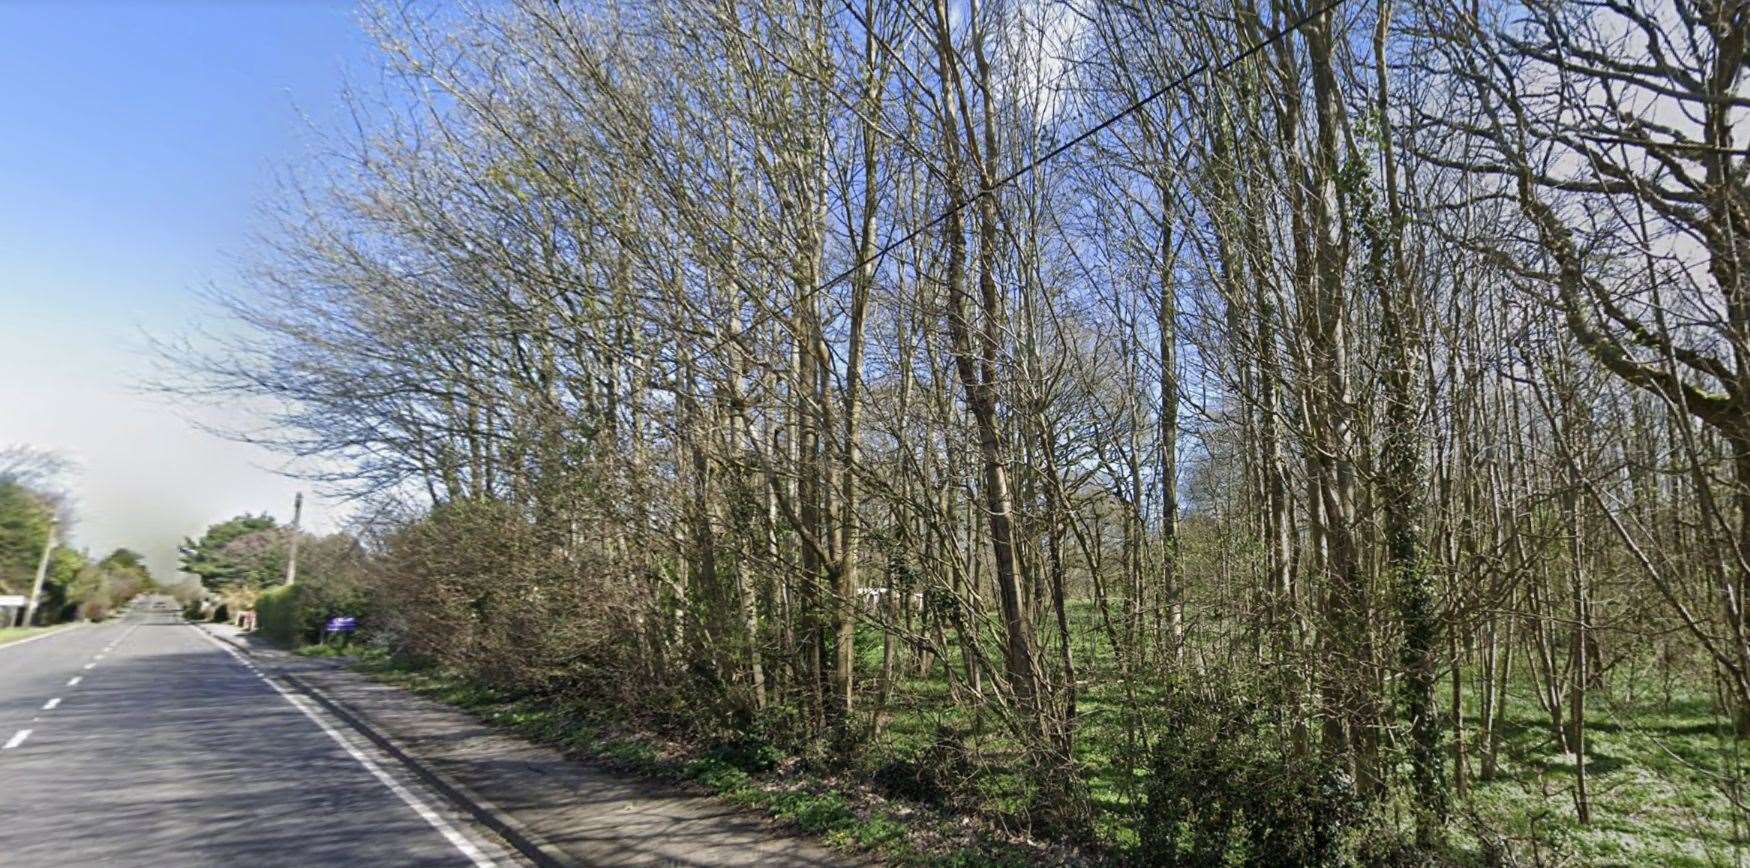 Police searched woods in Hawkinge near Folkestone for a man with a weapon. Photo: Google Maps